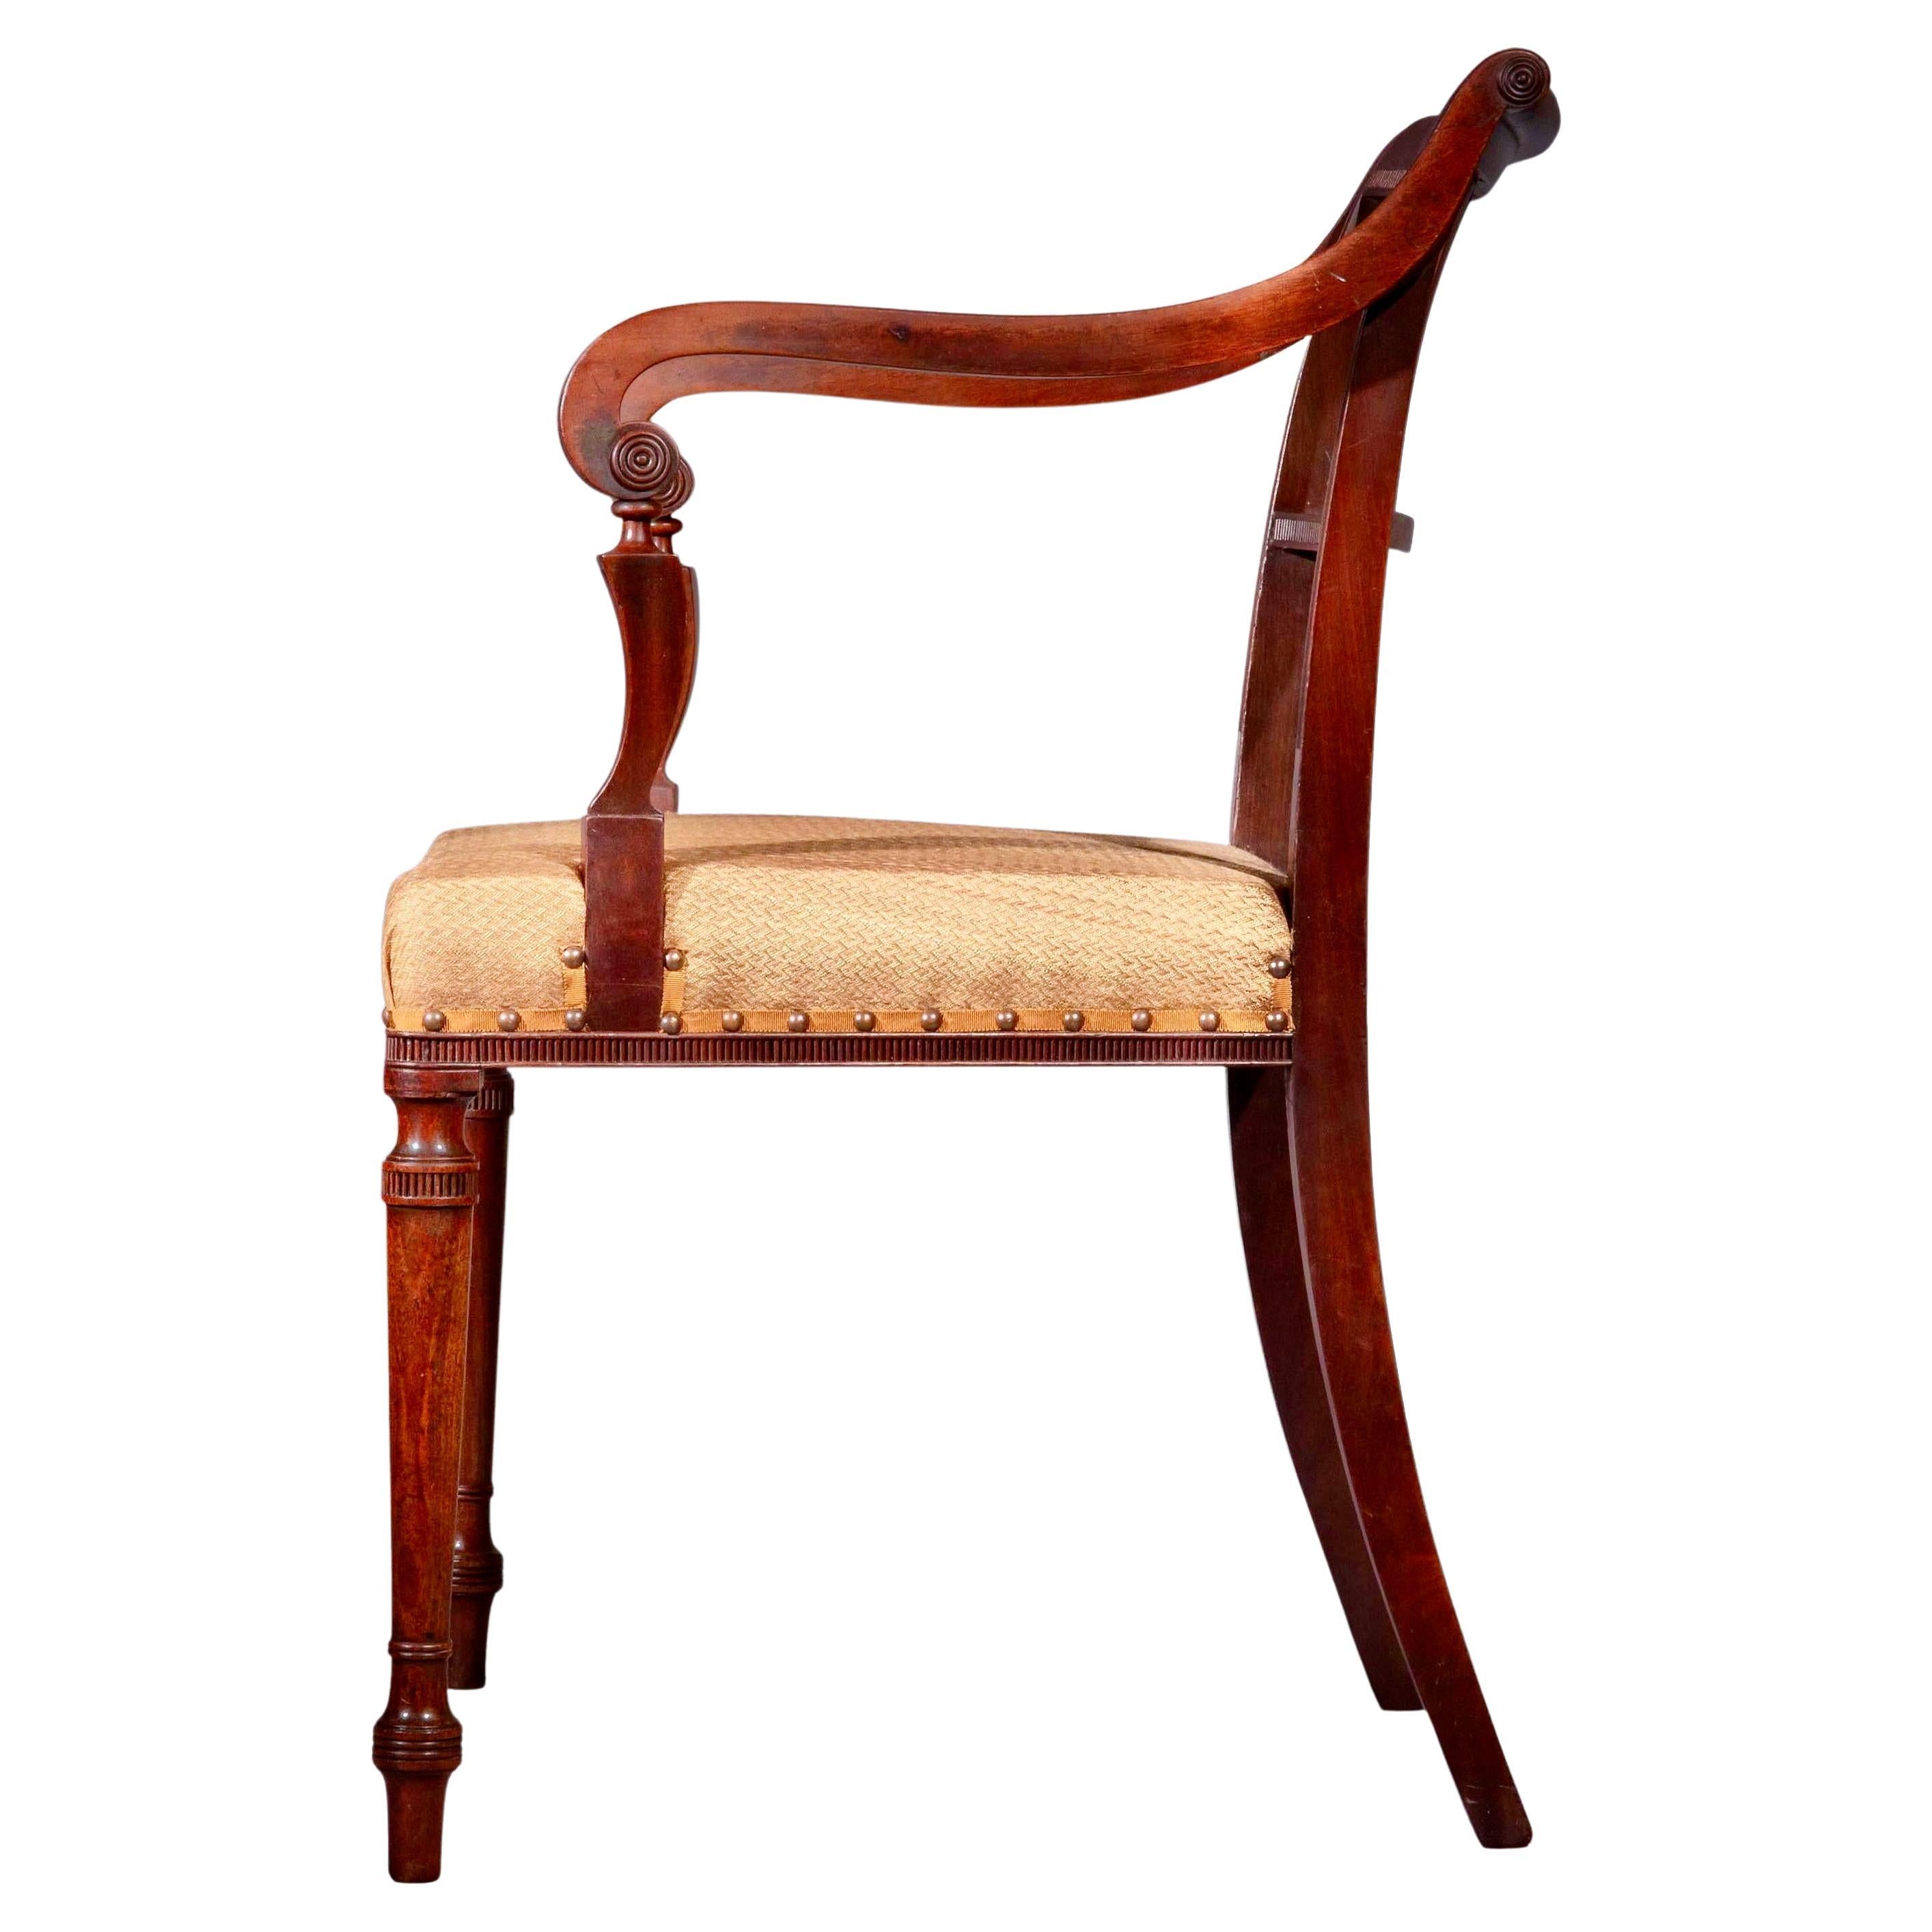 Early 19th Century Armchair or Desk Chair of Regency Period